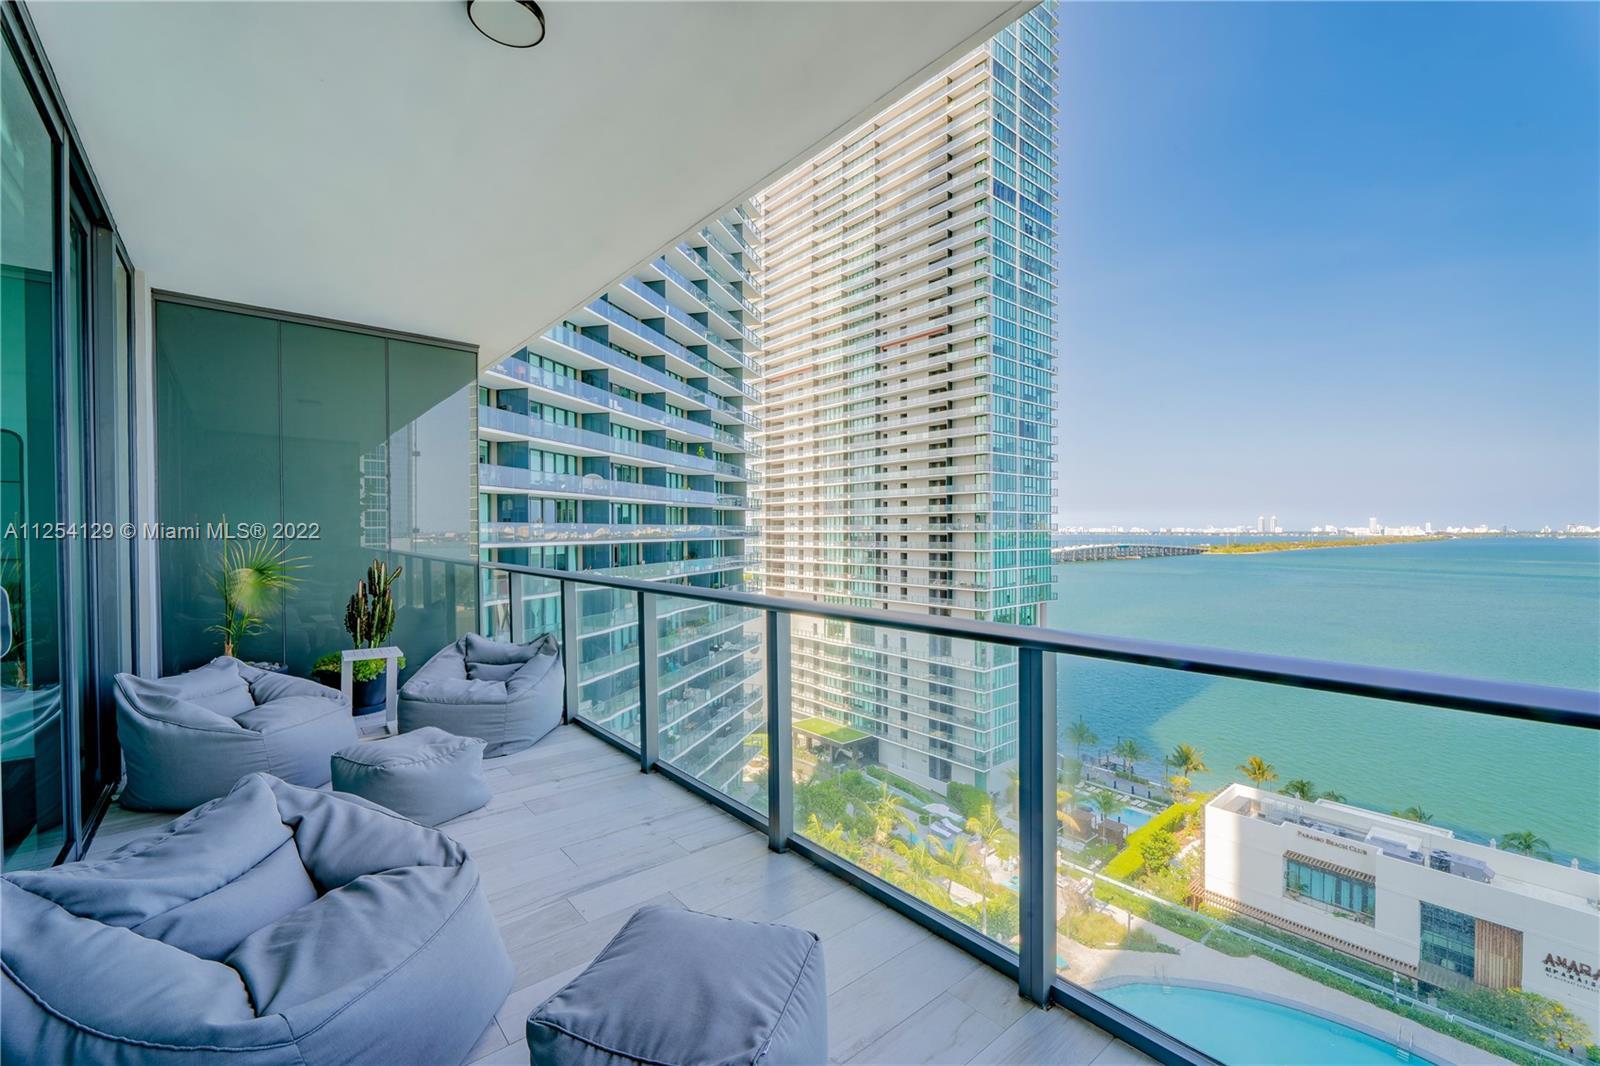 WELCOME TO PARAISO DISTRICT. Spectacular 2 bedroom 2 bath apartment with unmatched view of Biscayne 